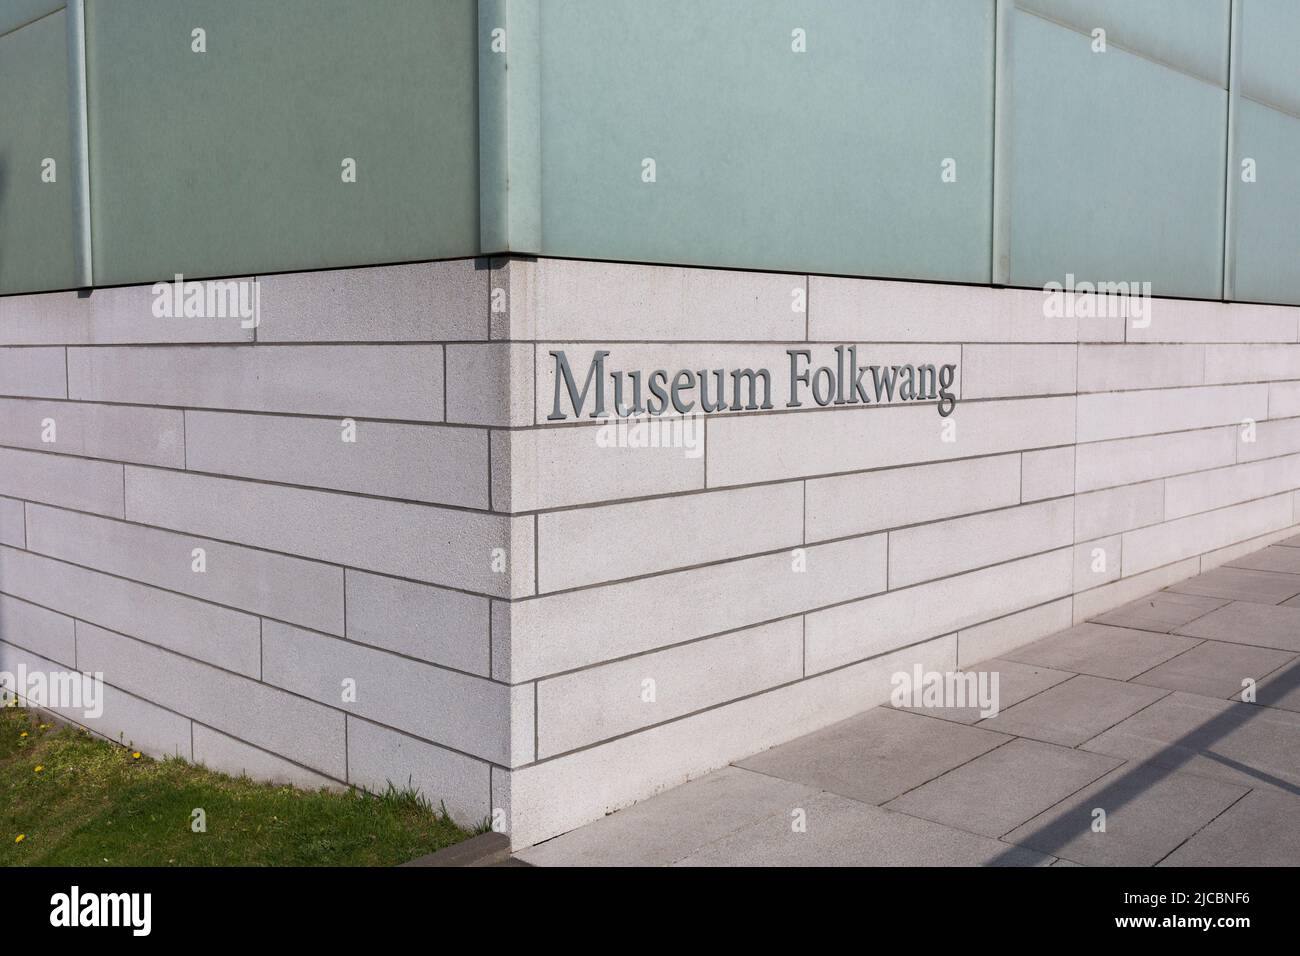 Essen, Germany - Mar 25, 2022: Writing Museum Folkwang, near the entrance of the famous art museum. Stock Photo